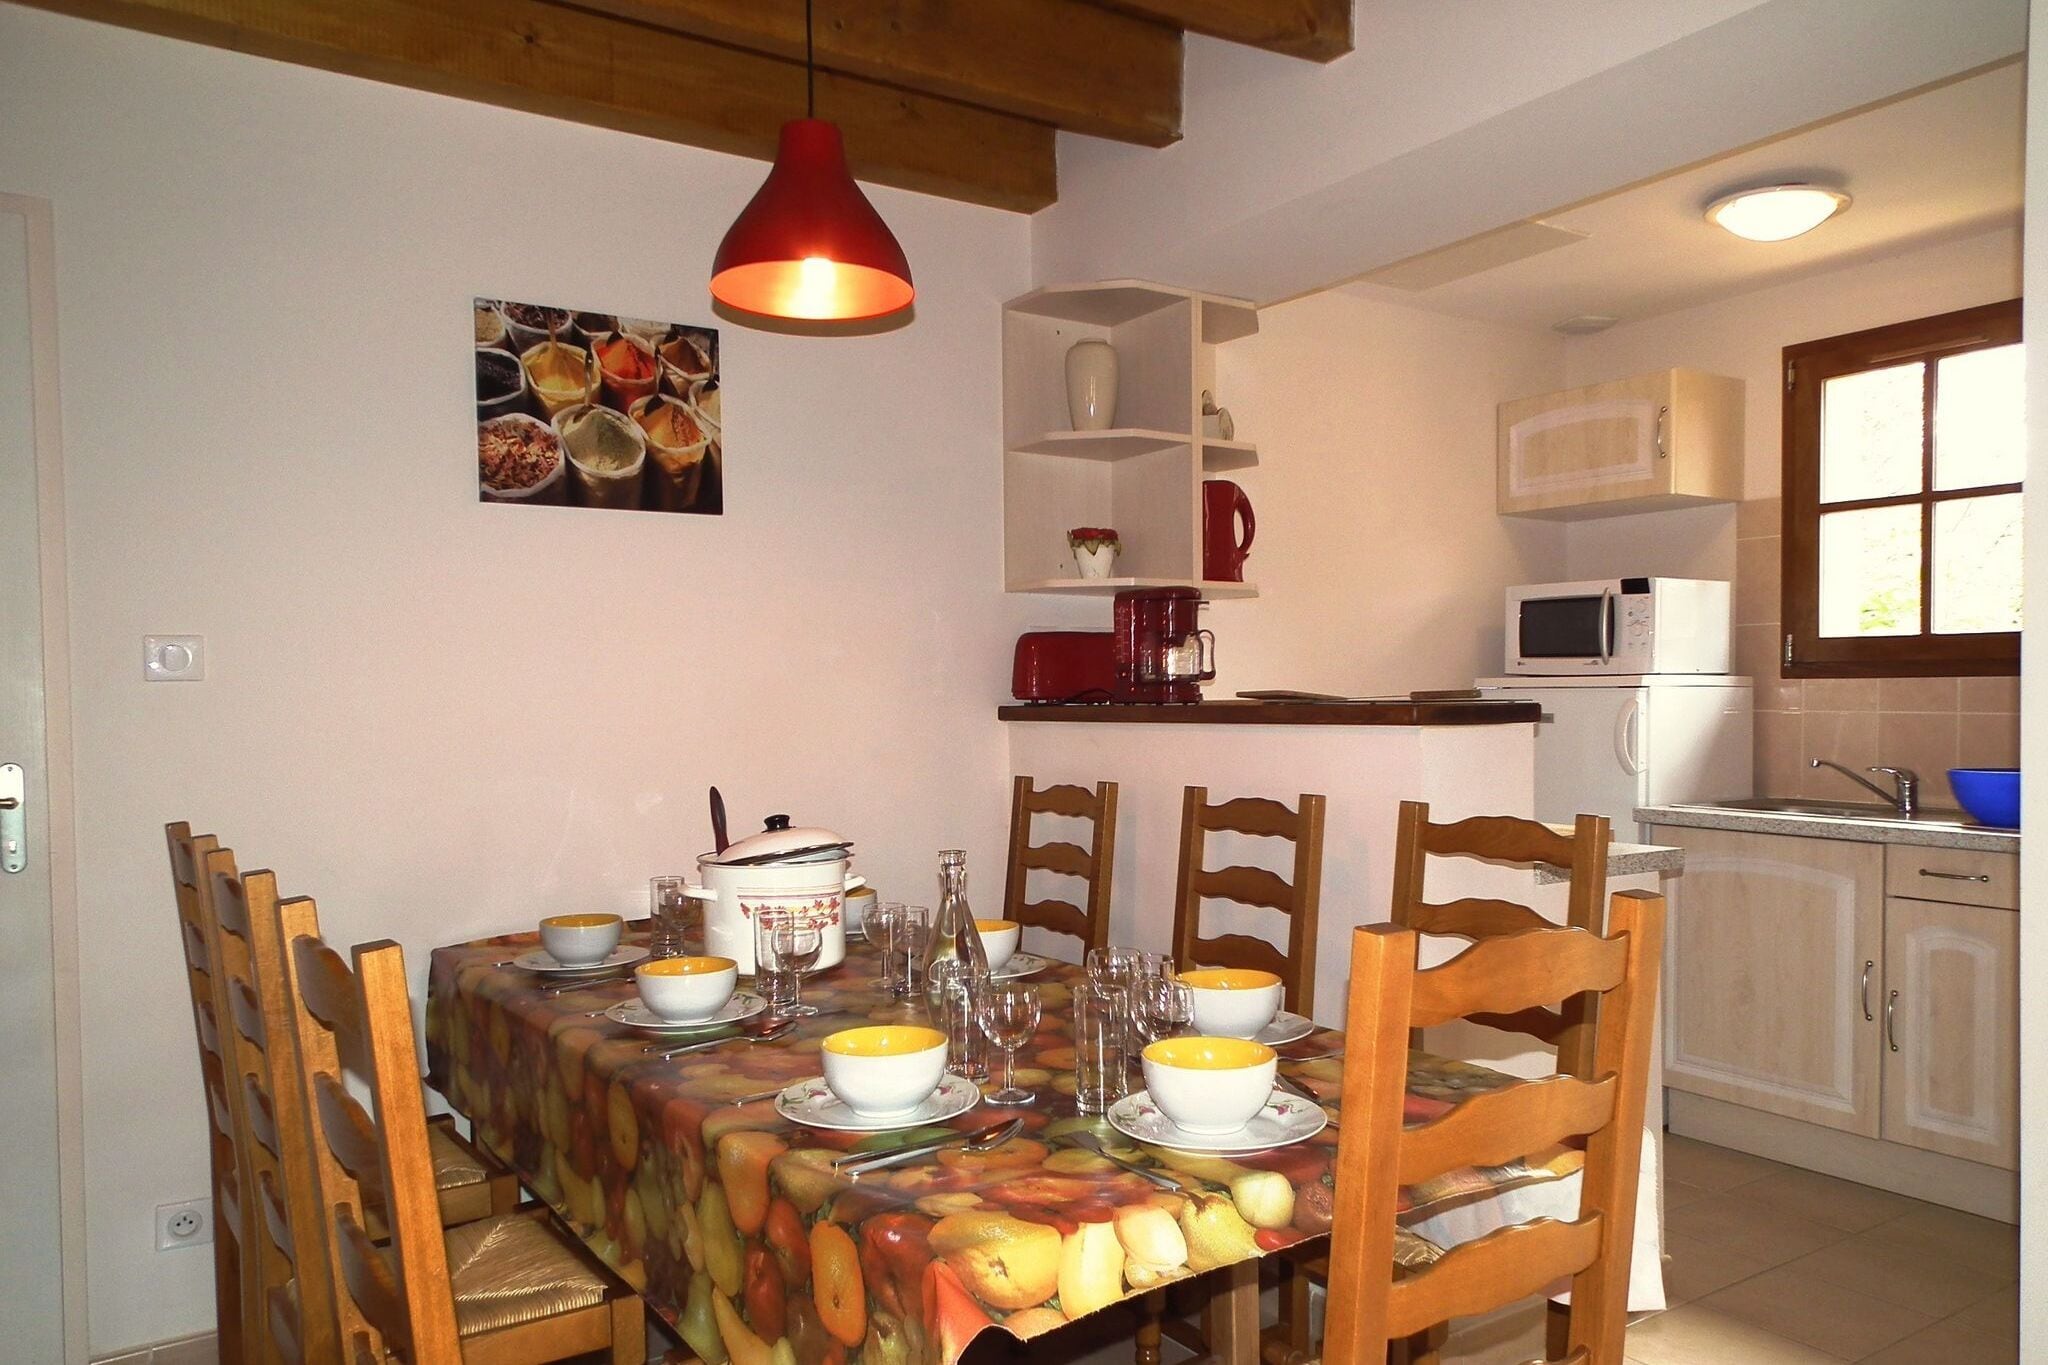 Nice villa with dishwasher located in the Dordogne